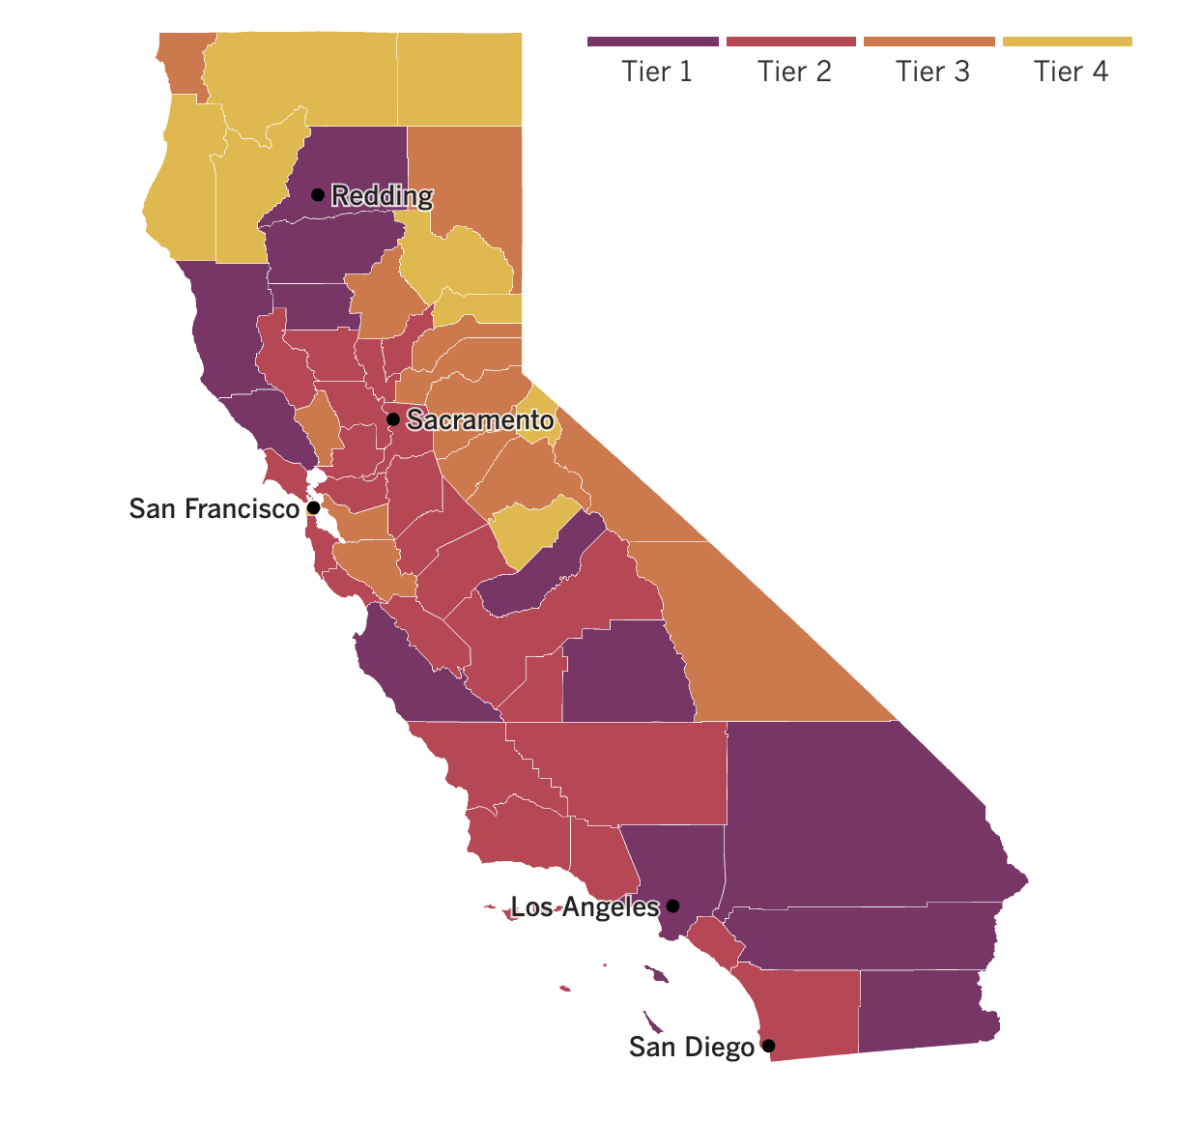 A map of California shows most counties in Tier 1 and 2 of reopening with some northern and Sierra counties in Tiers 3 and 4